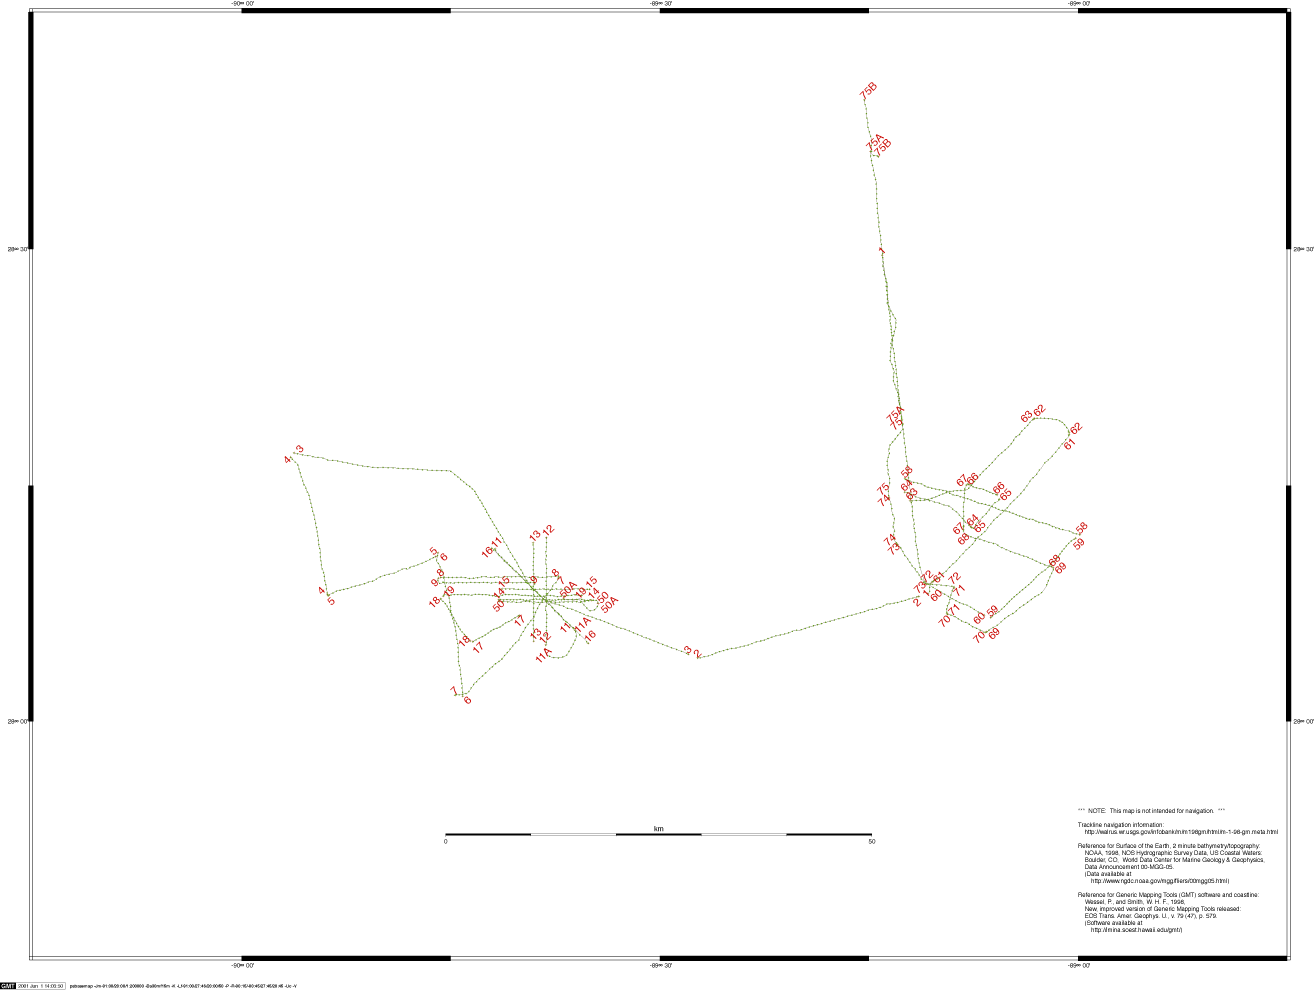 1998 trackline map without cdp numbers